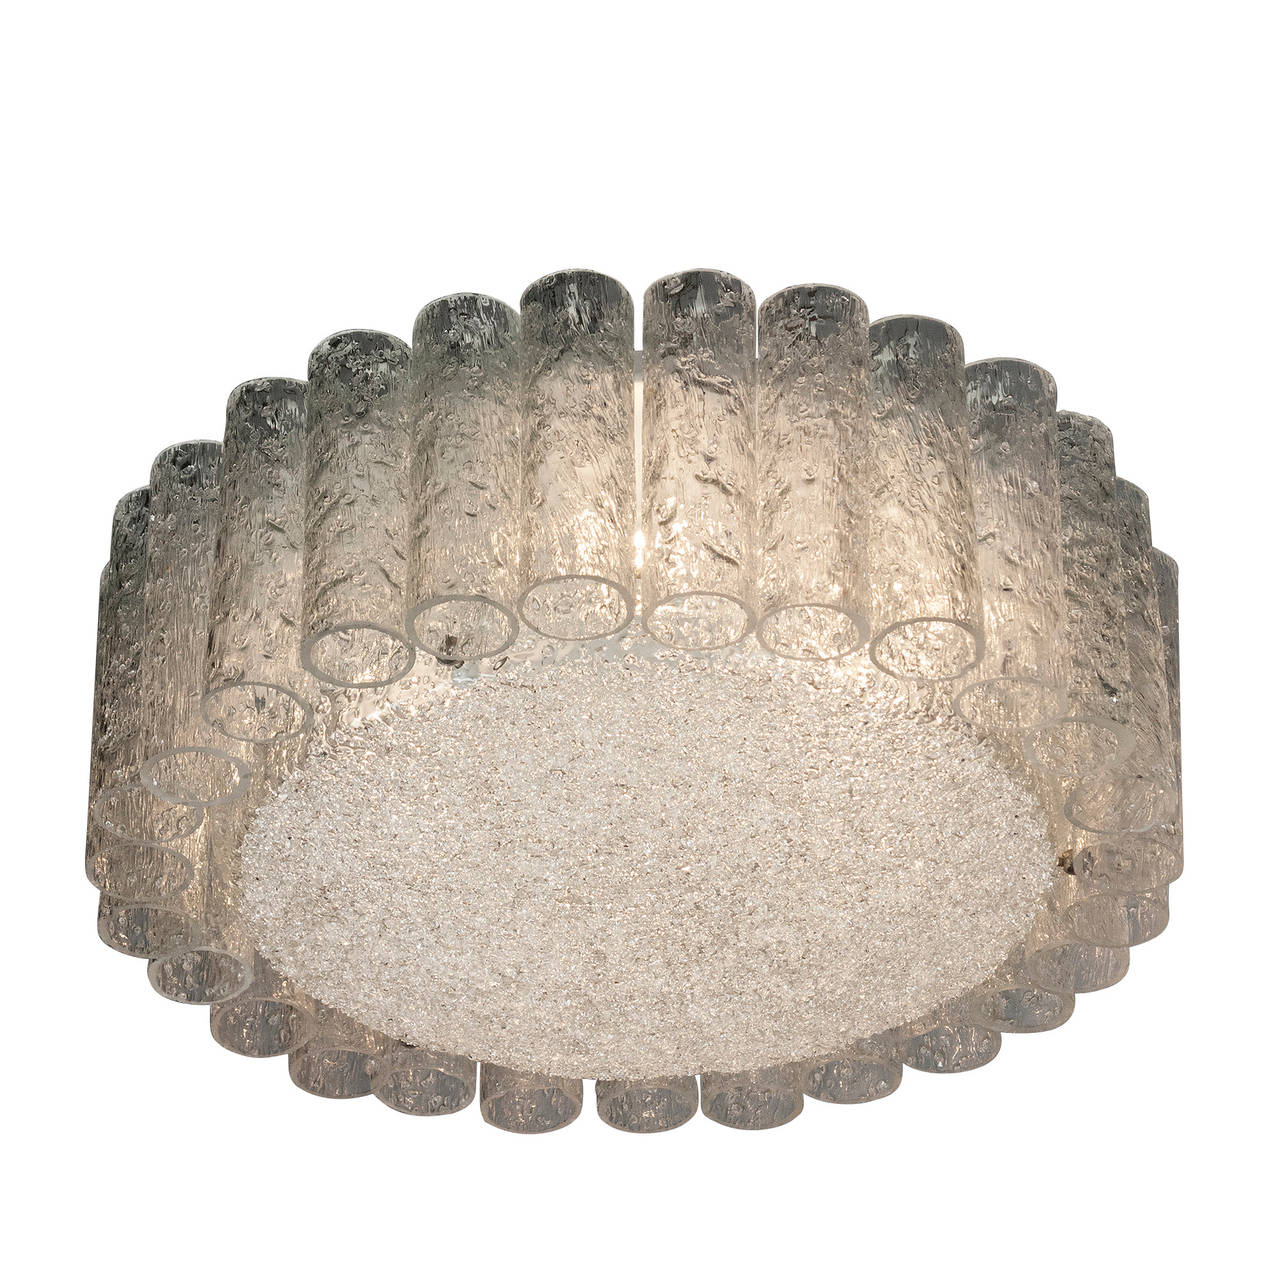 Flush moiunt textured glass chandelier, of overall circular form, a ring of glass cylinders around a central textured glass disc, by Doria, German, 1960s. Diameter 16 in, height 6 3/4 in.